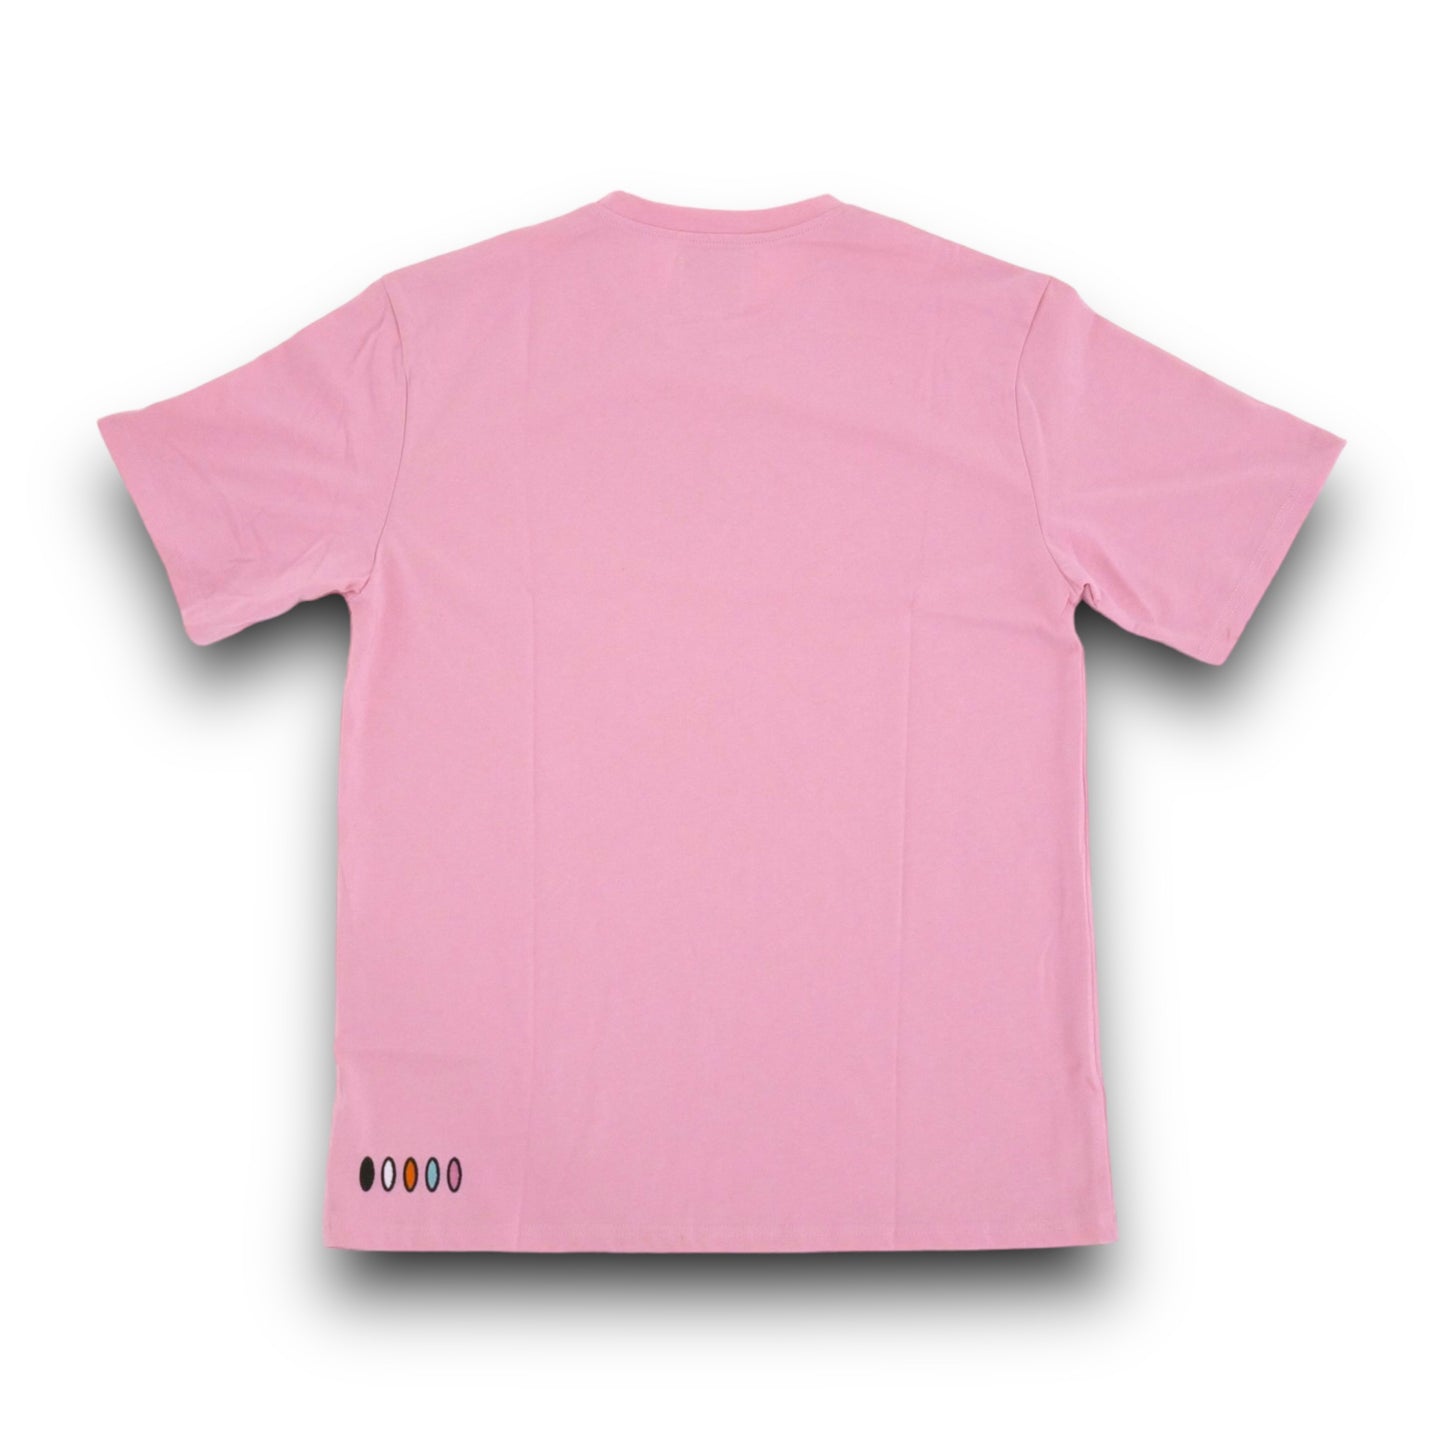 Patch tee pink